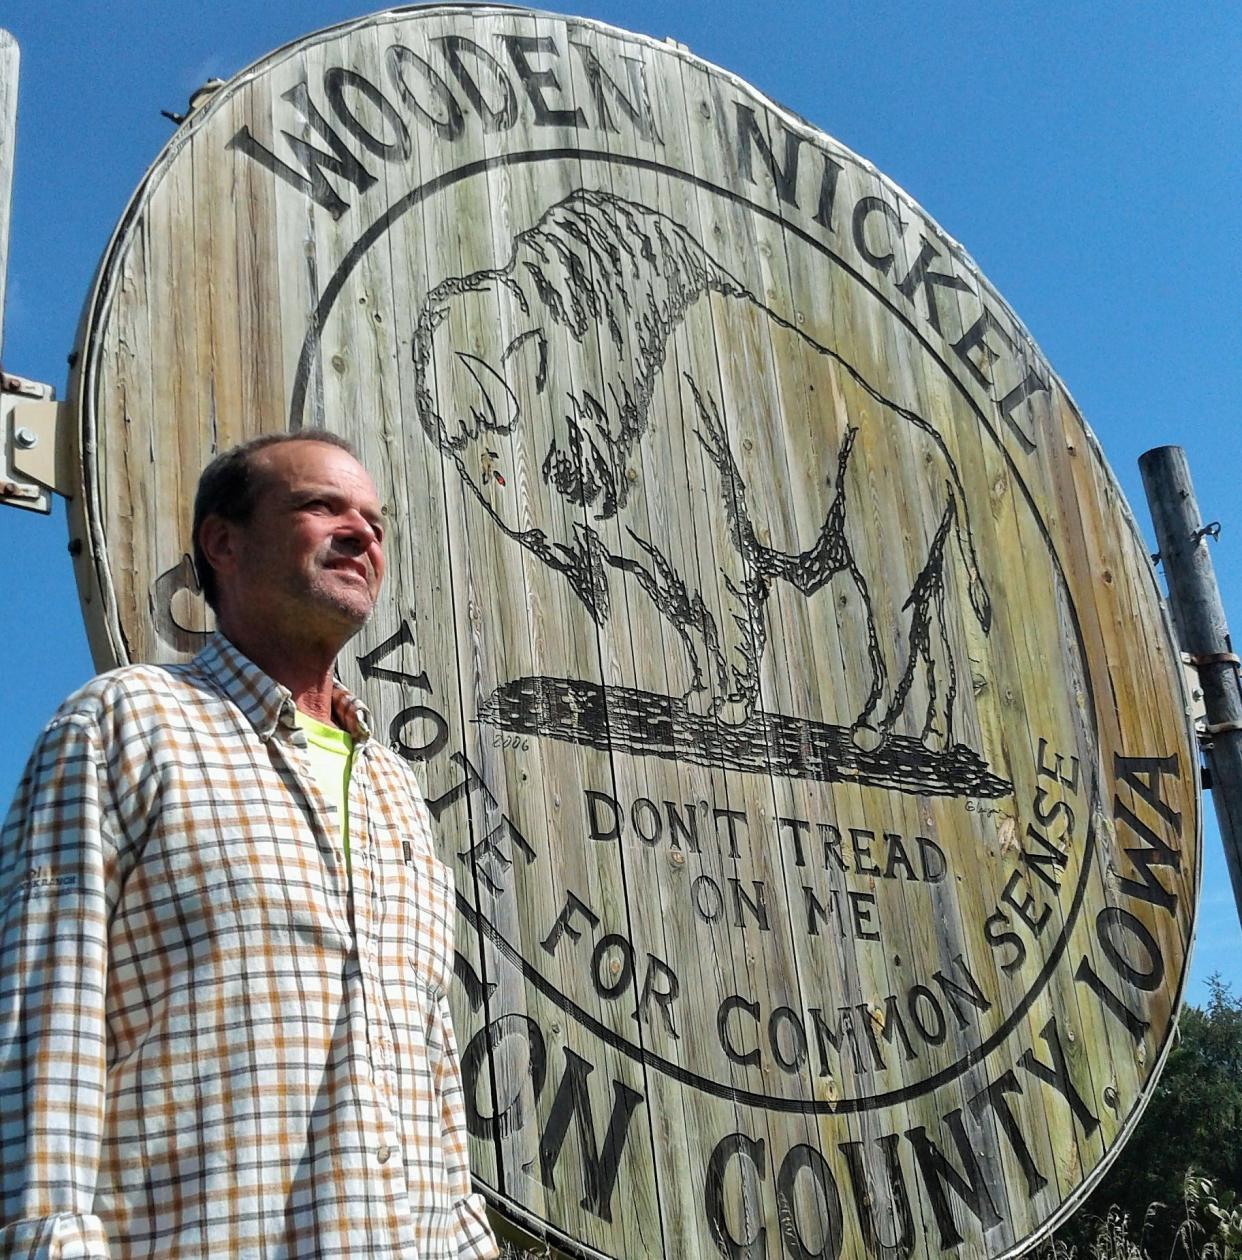 Jim Glasgow stopped to check out this sign he built in 2006 as part of a successful campaign to halt a proposed Johnson County road paving project. Now known as the World's Largest Wooden Nickel, it has become a tourist stop near I-80.